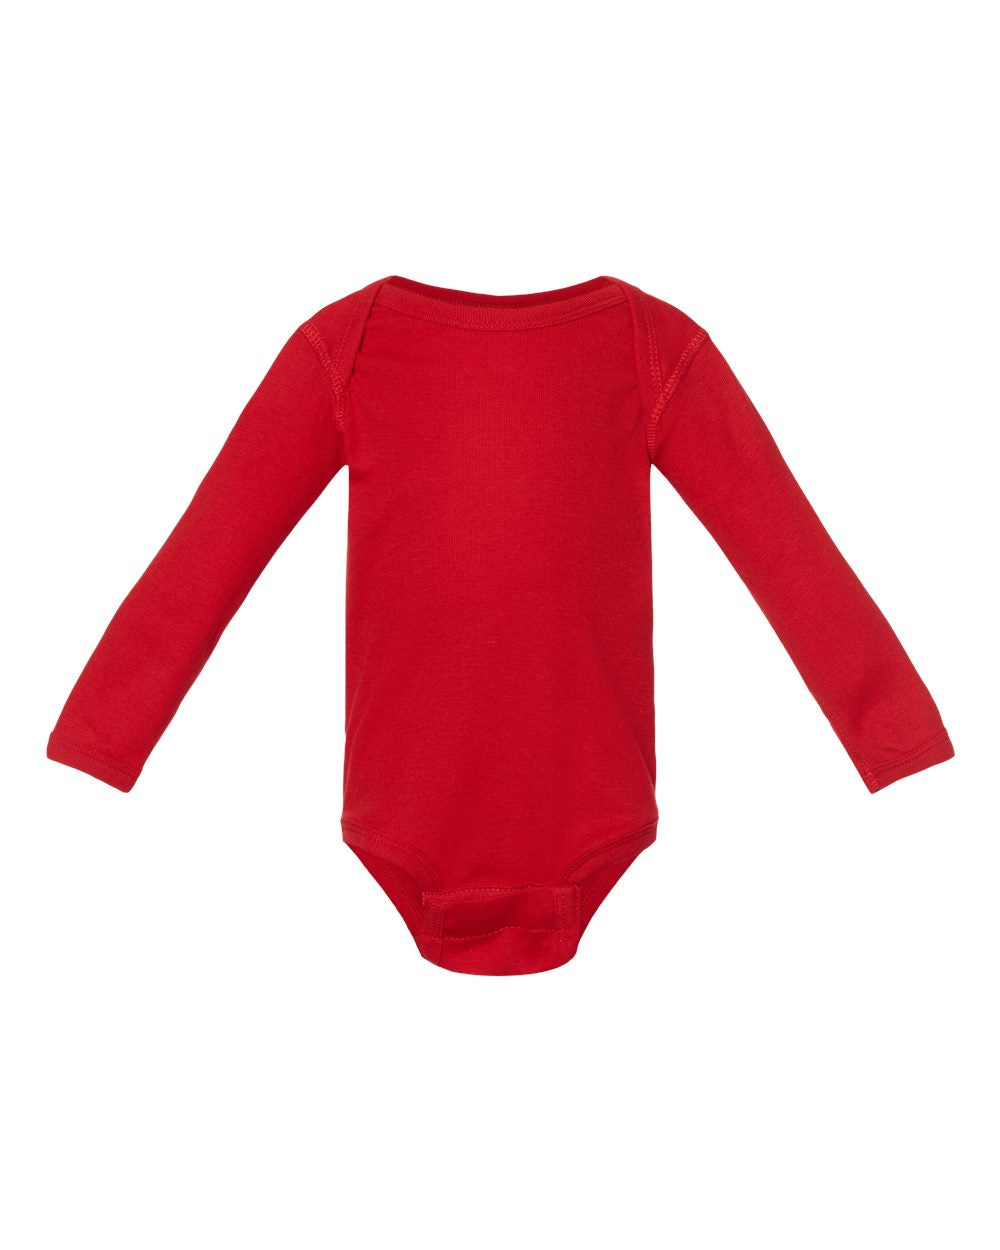 Design your own custom onesie - LONG Sleeve 0-18M Black, White, Red and Grey